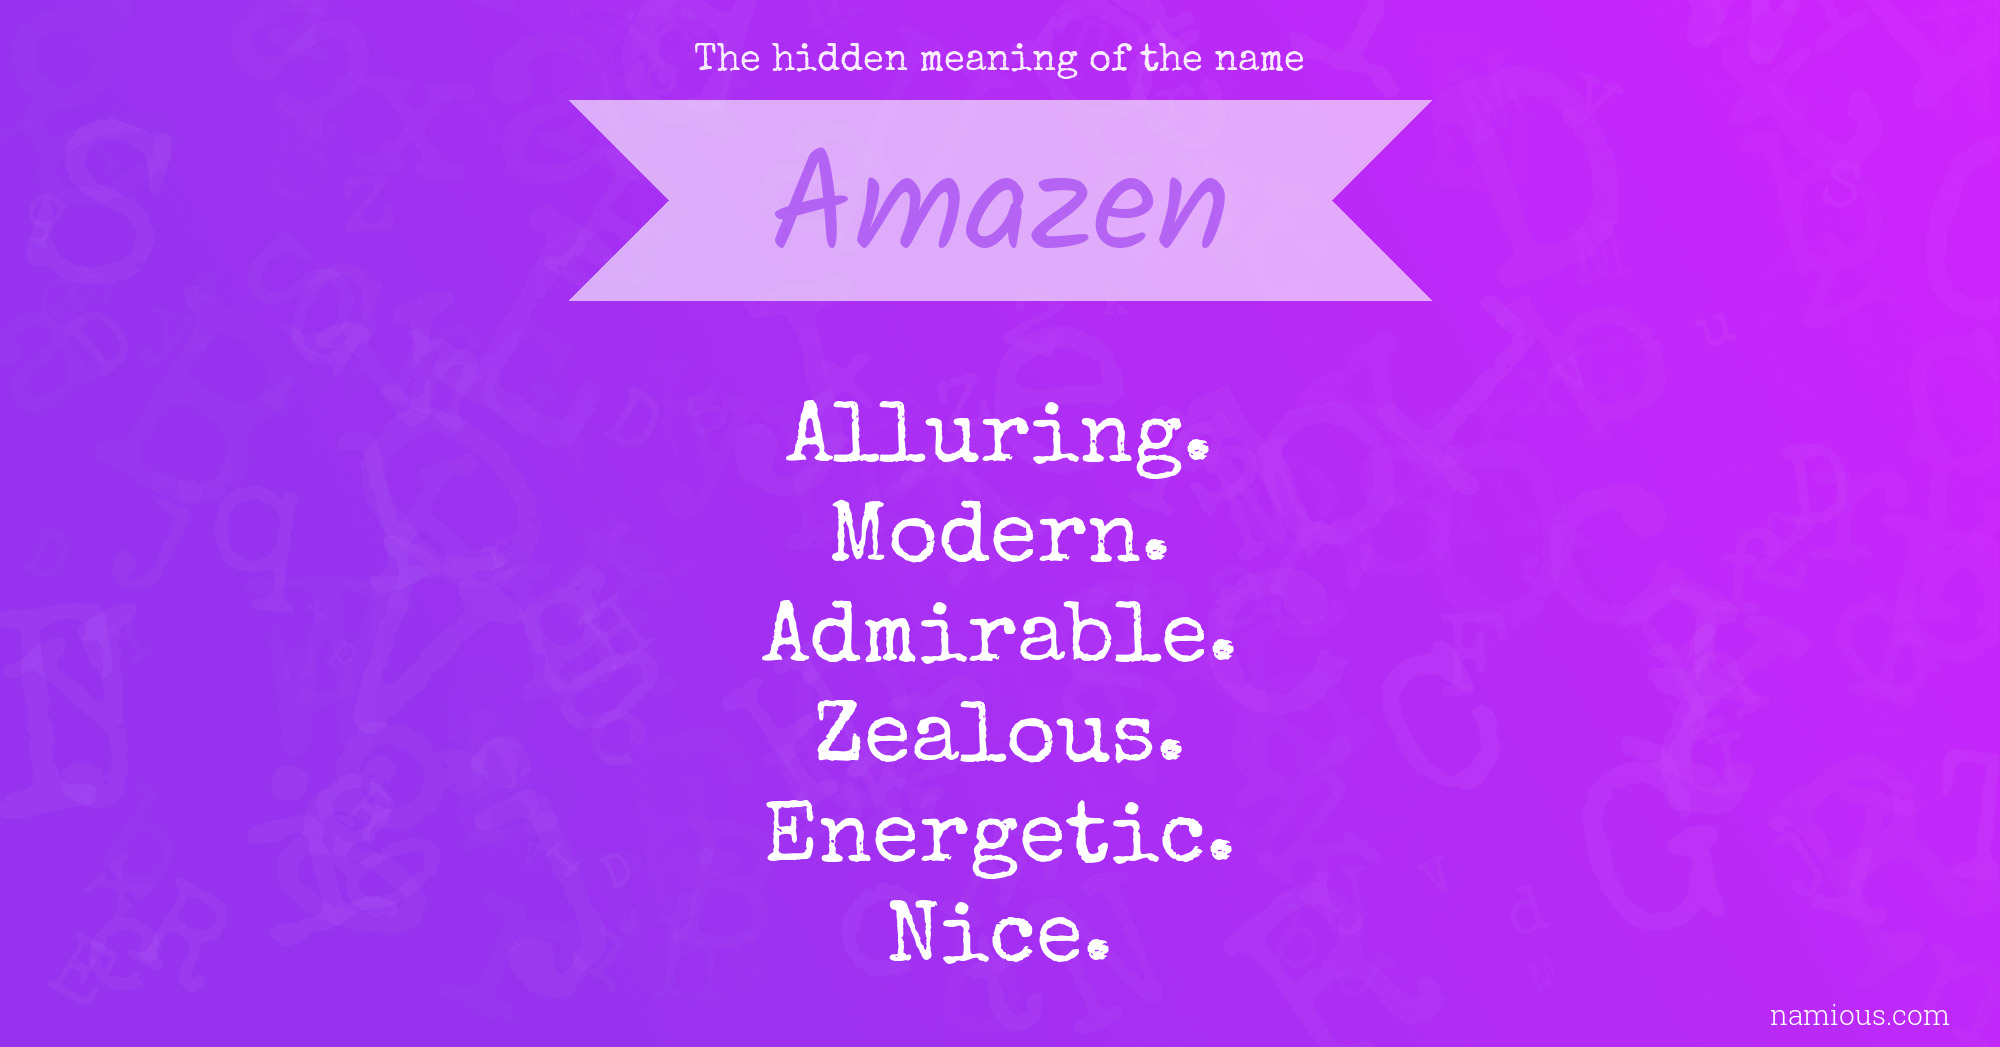 The hidden meaning of the name Amazen